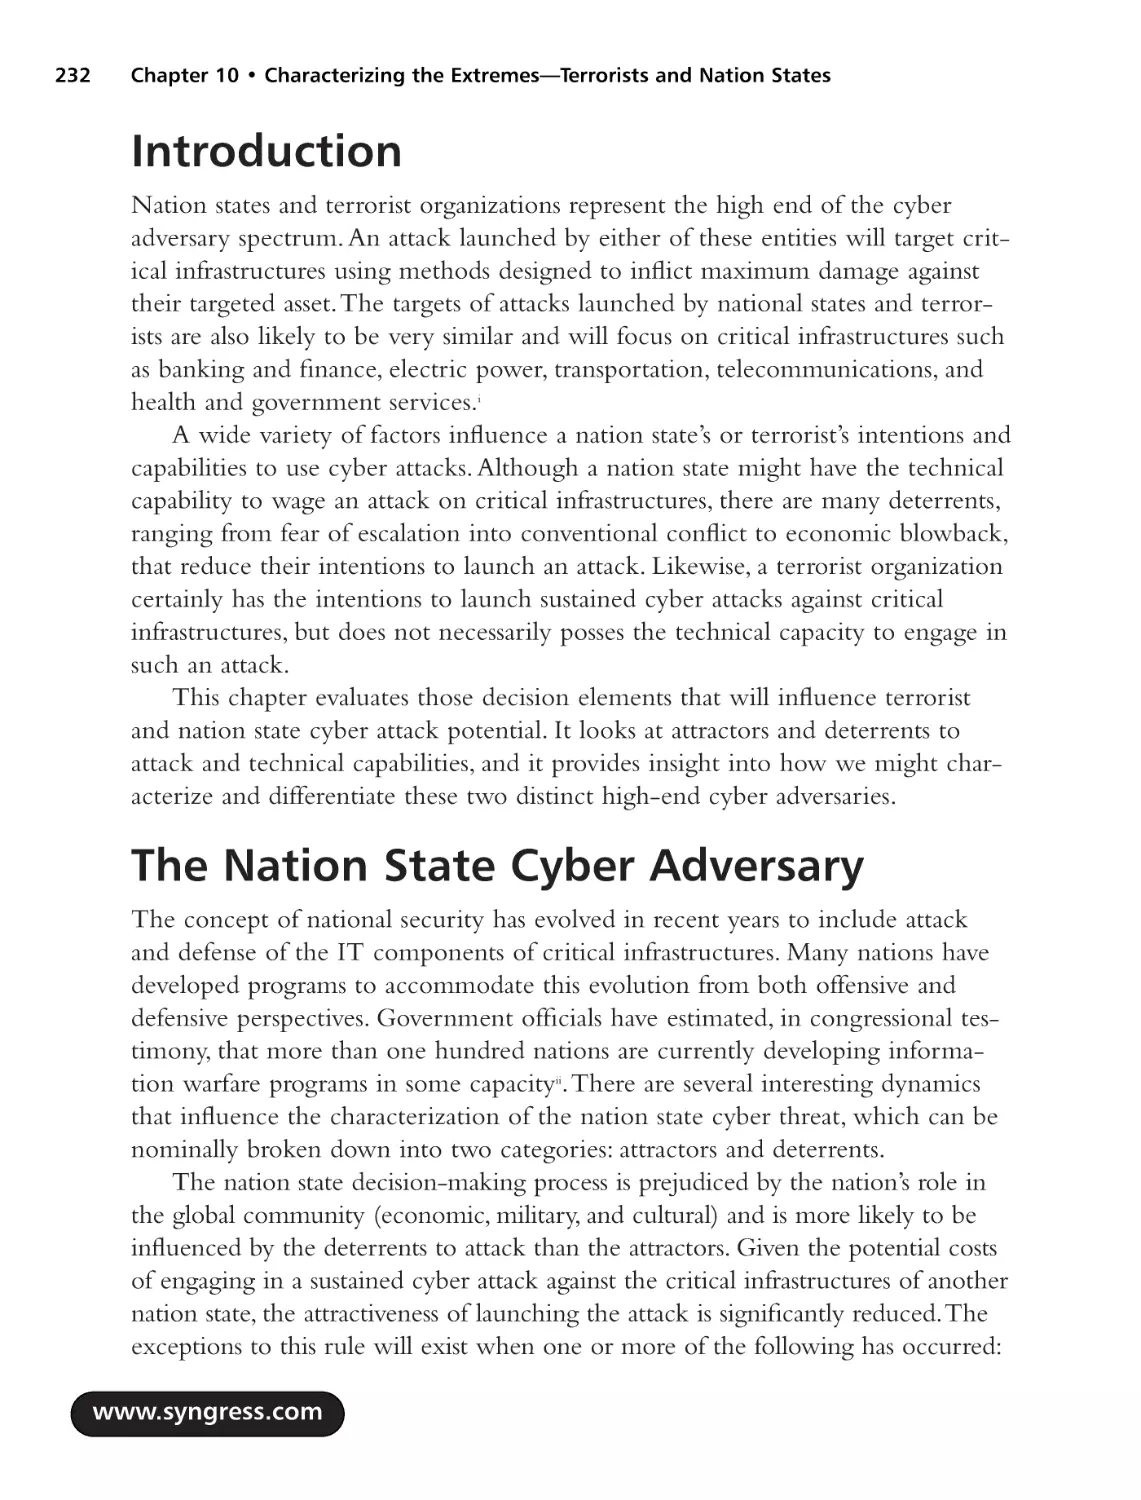 Introduction
The Nation State Cyber Adversary